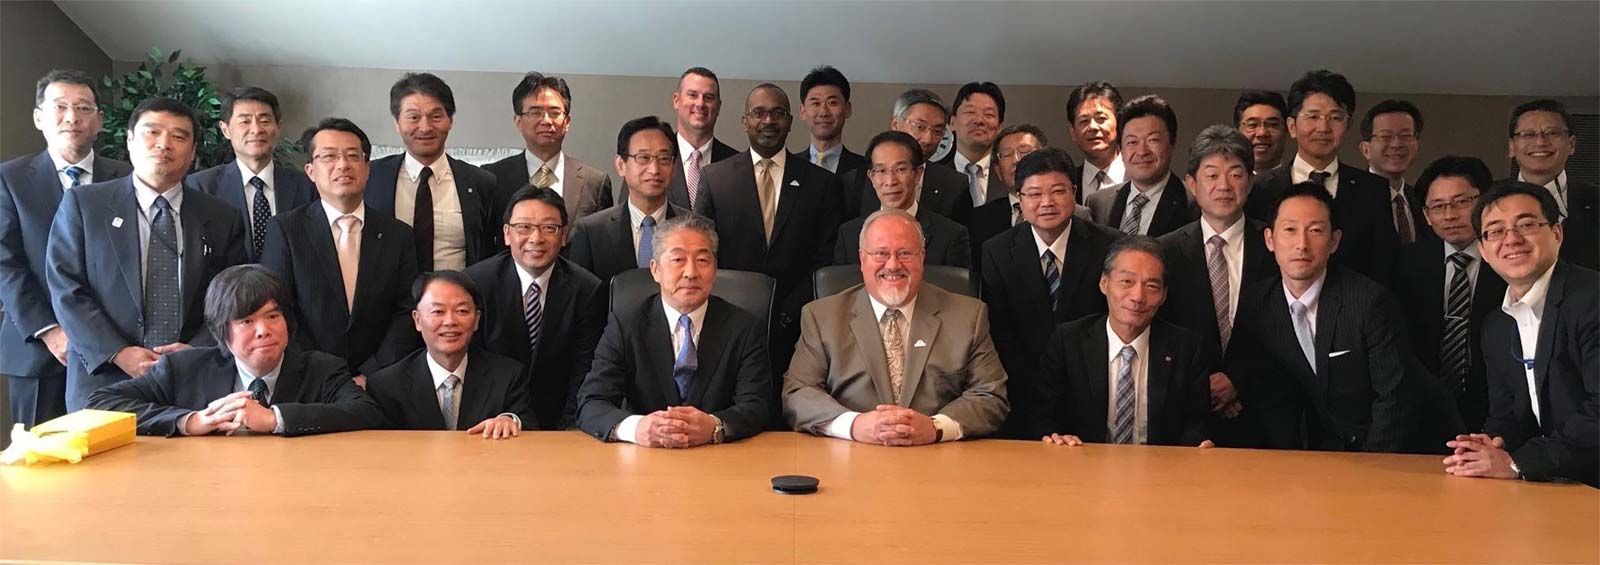 Japanese Bankers posing behind conference table